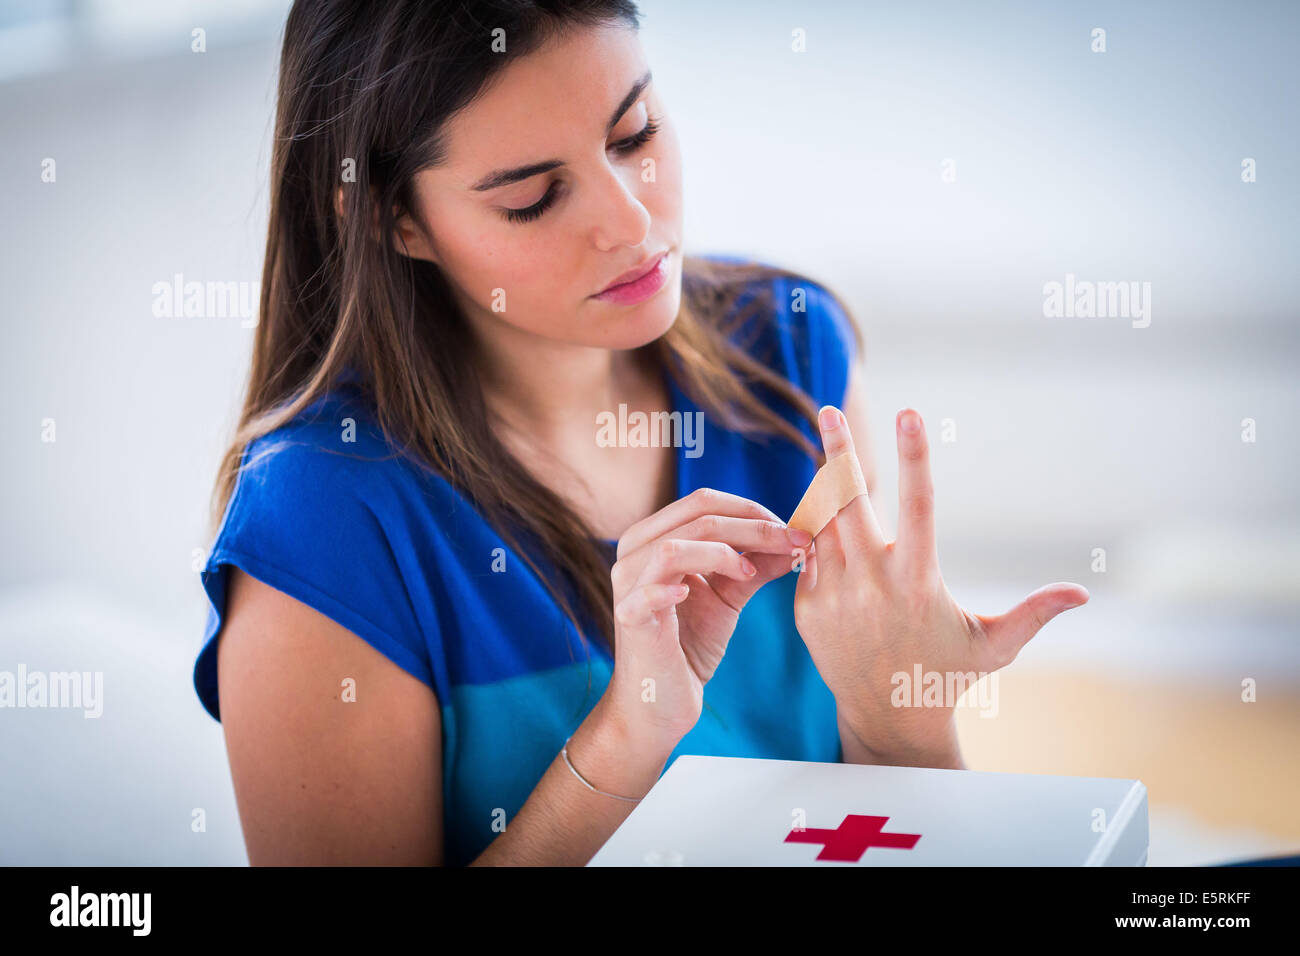 Woman putting a band-aid on her finger. Stock Photo